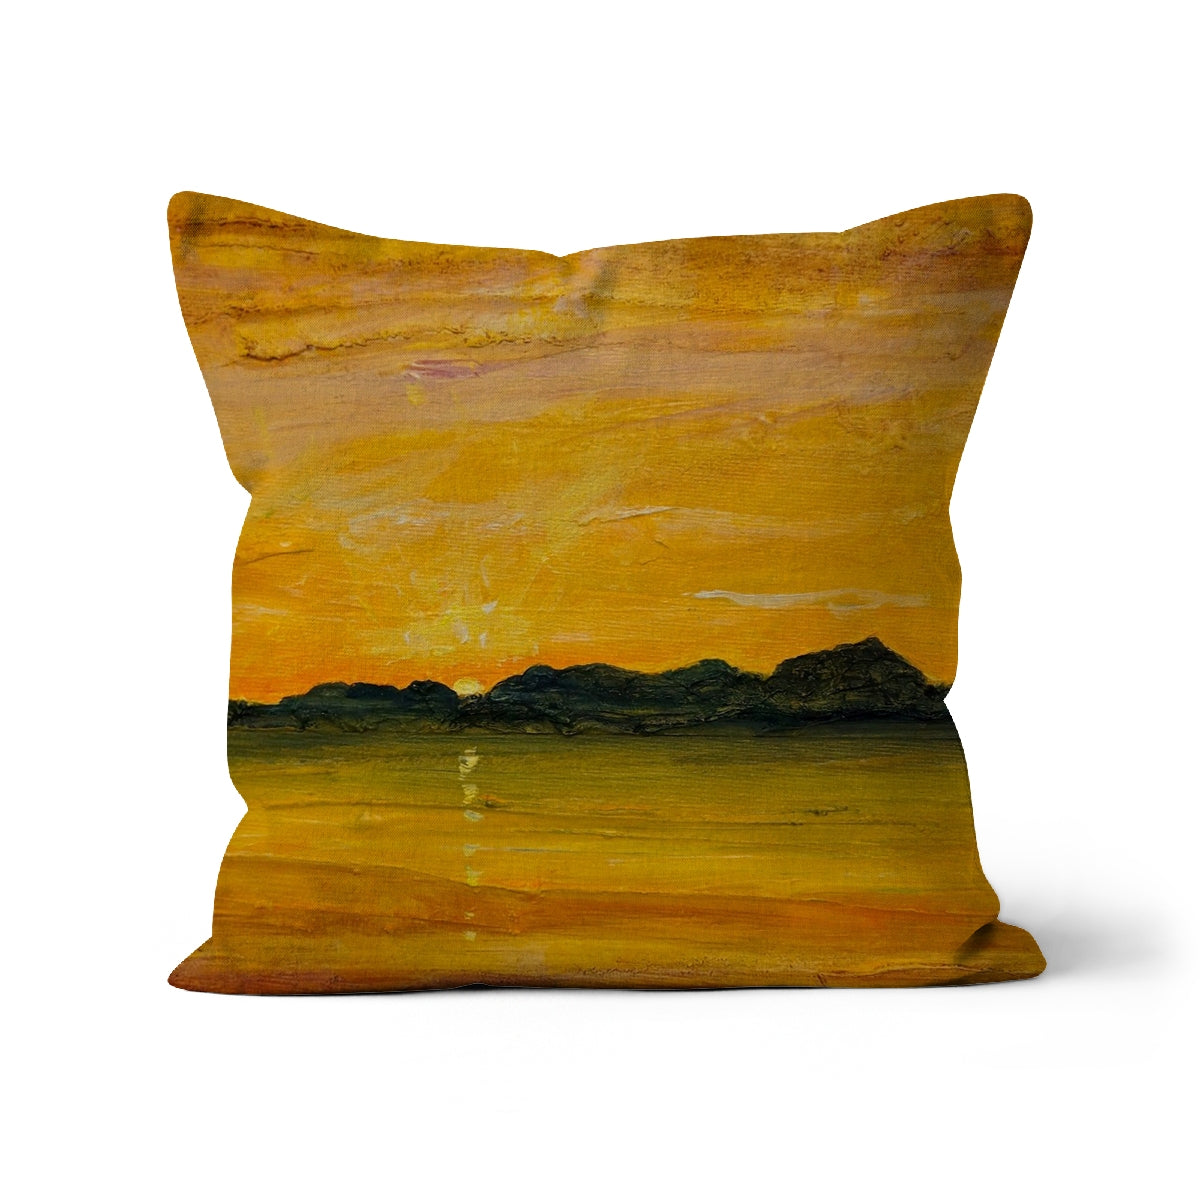 Jura Sunset Art Gifts Cushion-Cushions-Hebridean Islands Art Gallery-Faux Suede-22"x22"-Paintings, Prints, Homeware, Art Gifts From Scotland By Scottish Artist Kevin Hunter